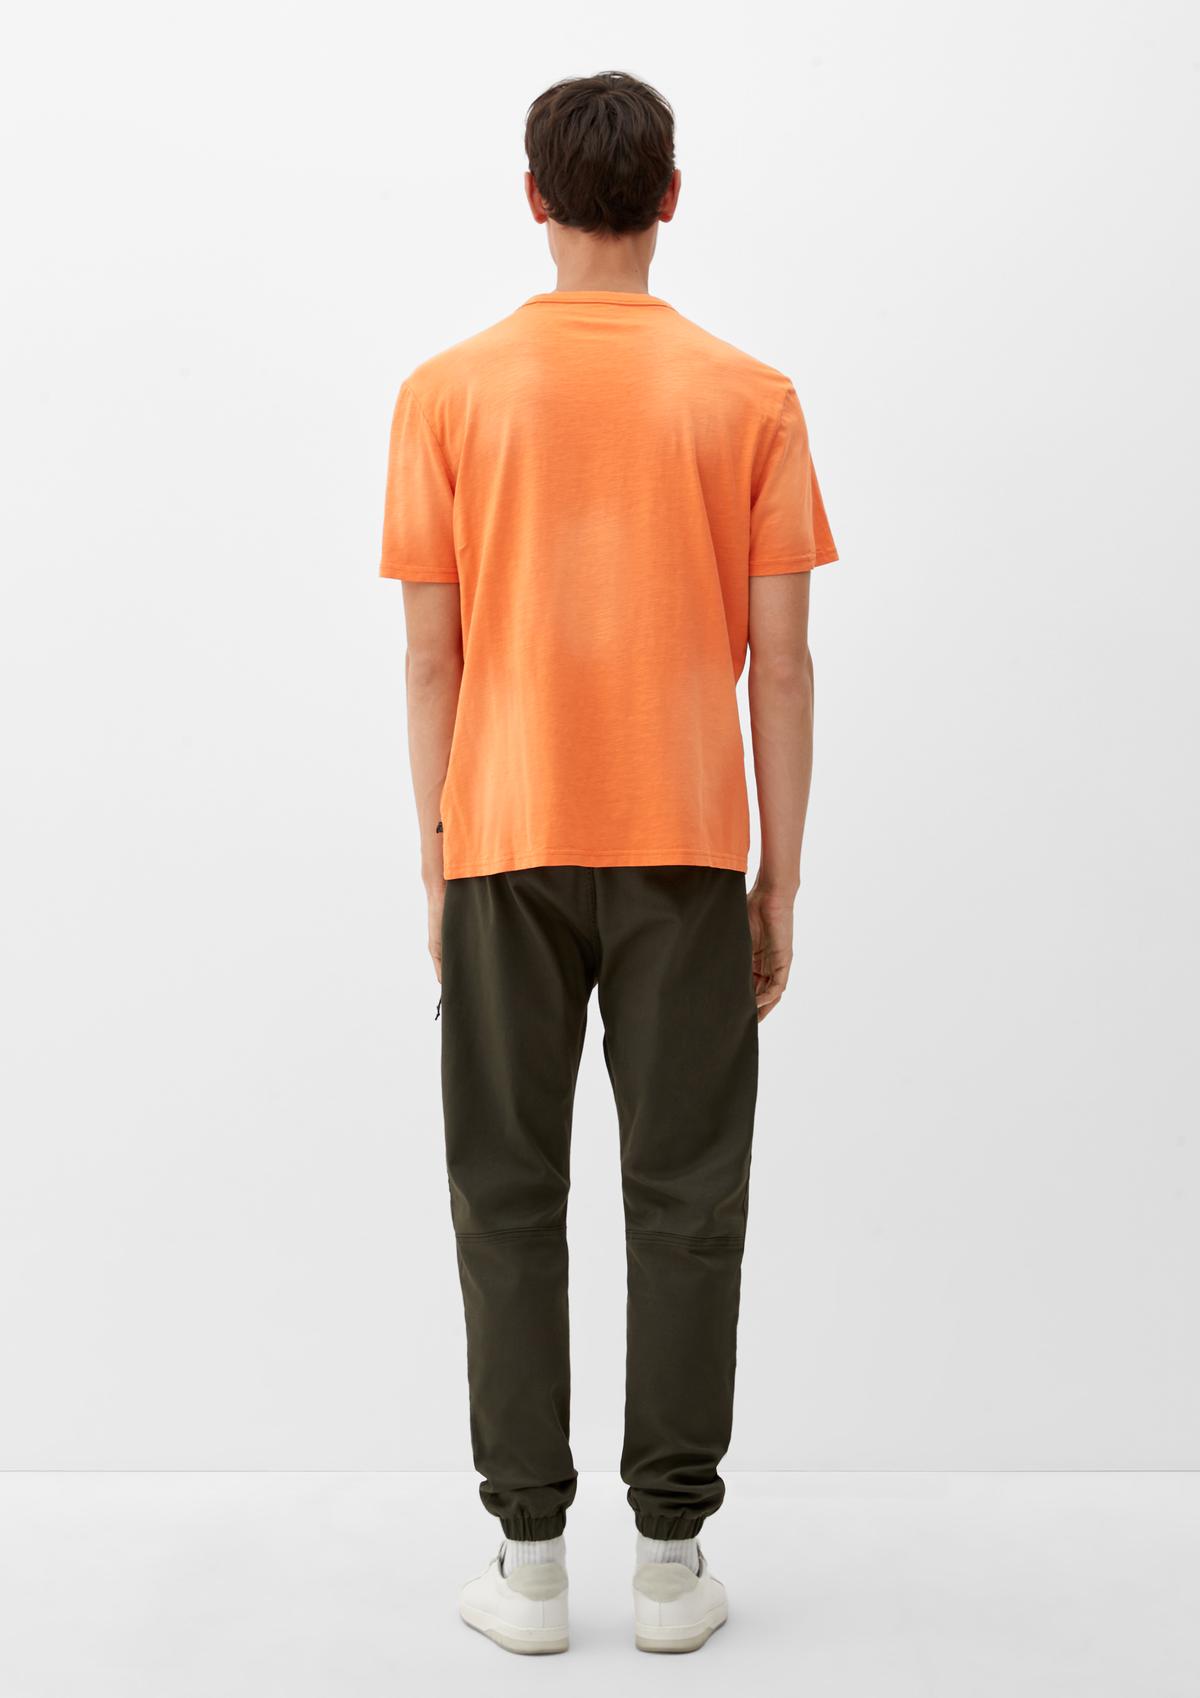 T-shirt with a breast orange pocket 